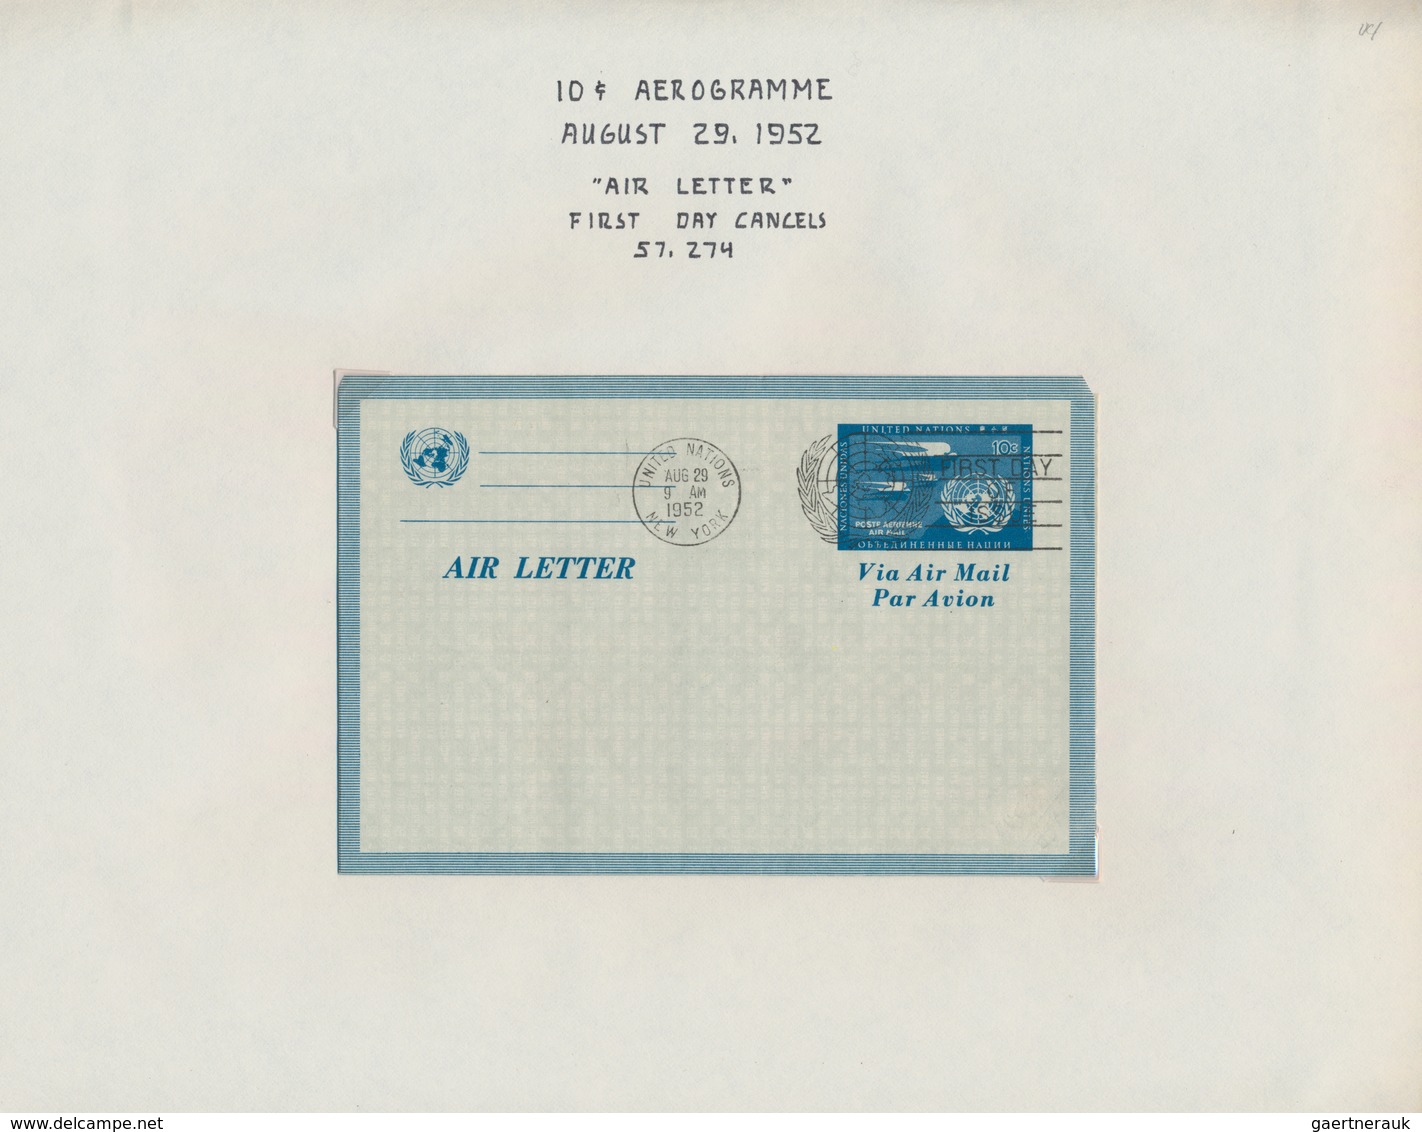 Vereinte Nationen - Alle Ämter: 1952/99 (ca.) Postal Stationery Collection Of Approx. 270 Unused And - New York/Geneva/Vienna Joint Issues